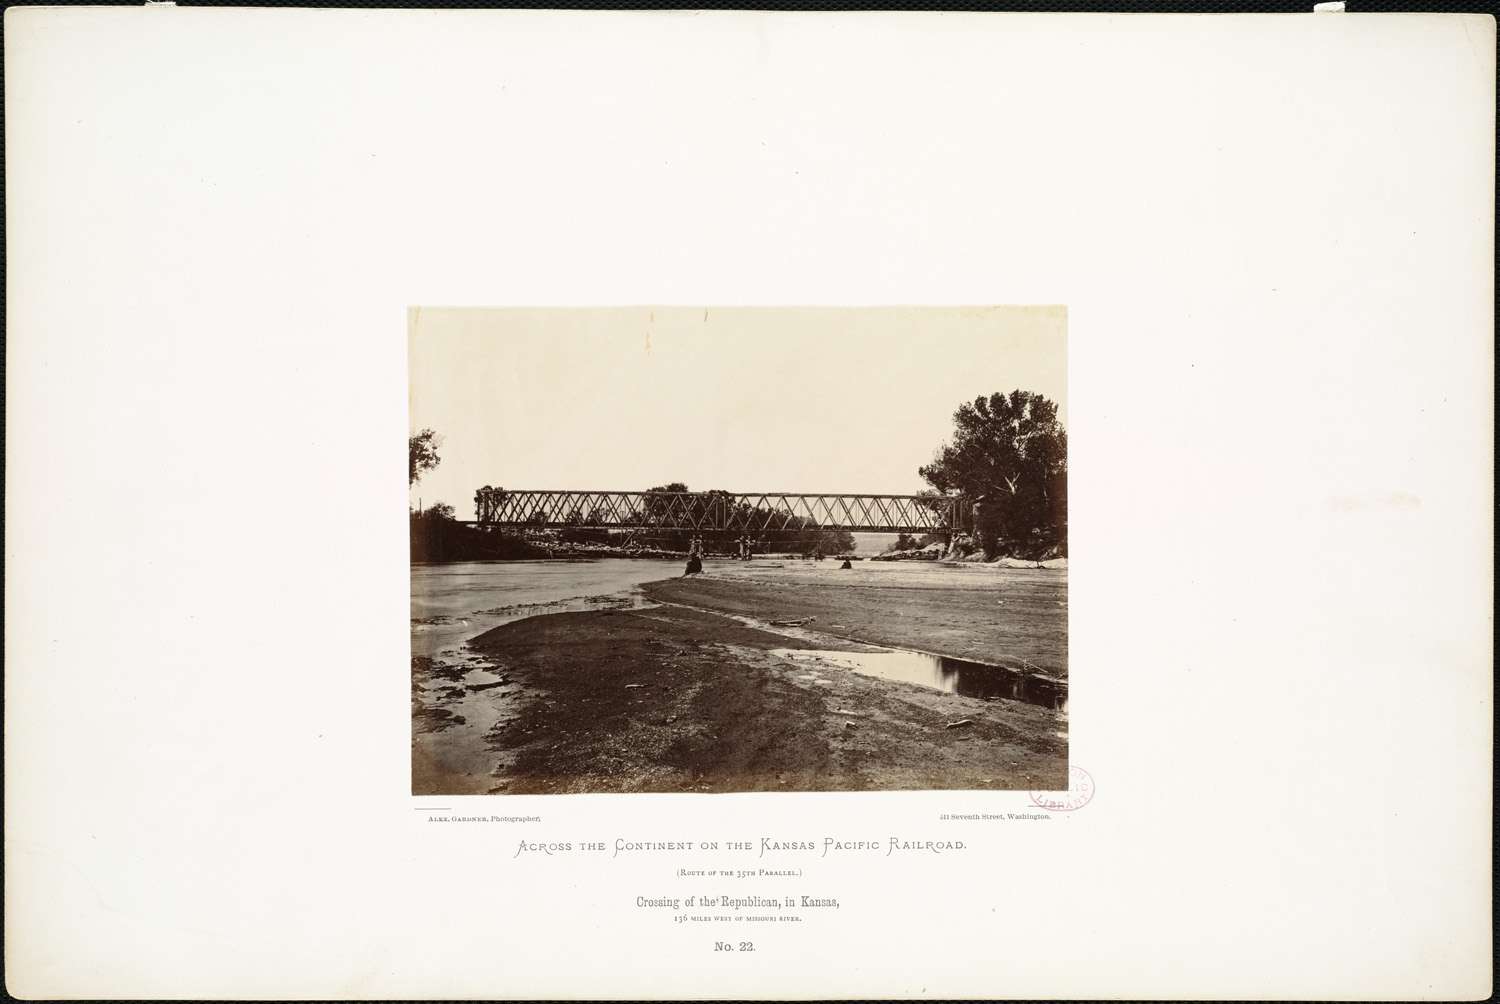 The Kansas Pacific Railway bridge across the Republican River and behind that, a pontoon bridge. [ Alexander Gardner (photographer), 1867] The present Union Pacific Railroad and Custer Road/Grant Road (previously U.S. Route 40) still bridge the Republican River at the same locations. Public access to the Kansas River National Water Trail is between the two bridges.